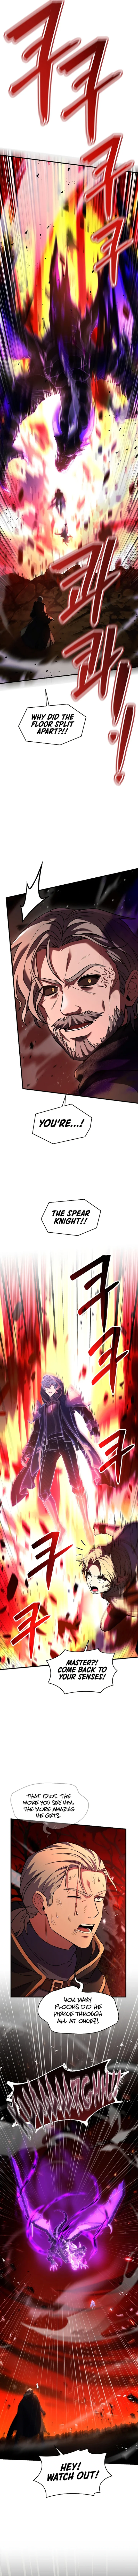 Return of the Legendary Spear Knight - Chapter 115 Page 9